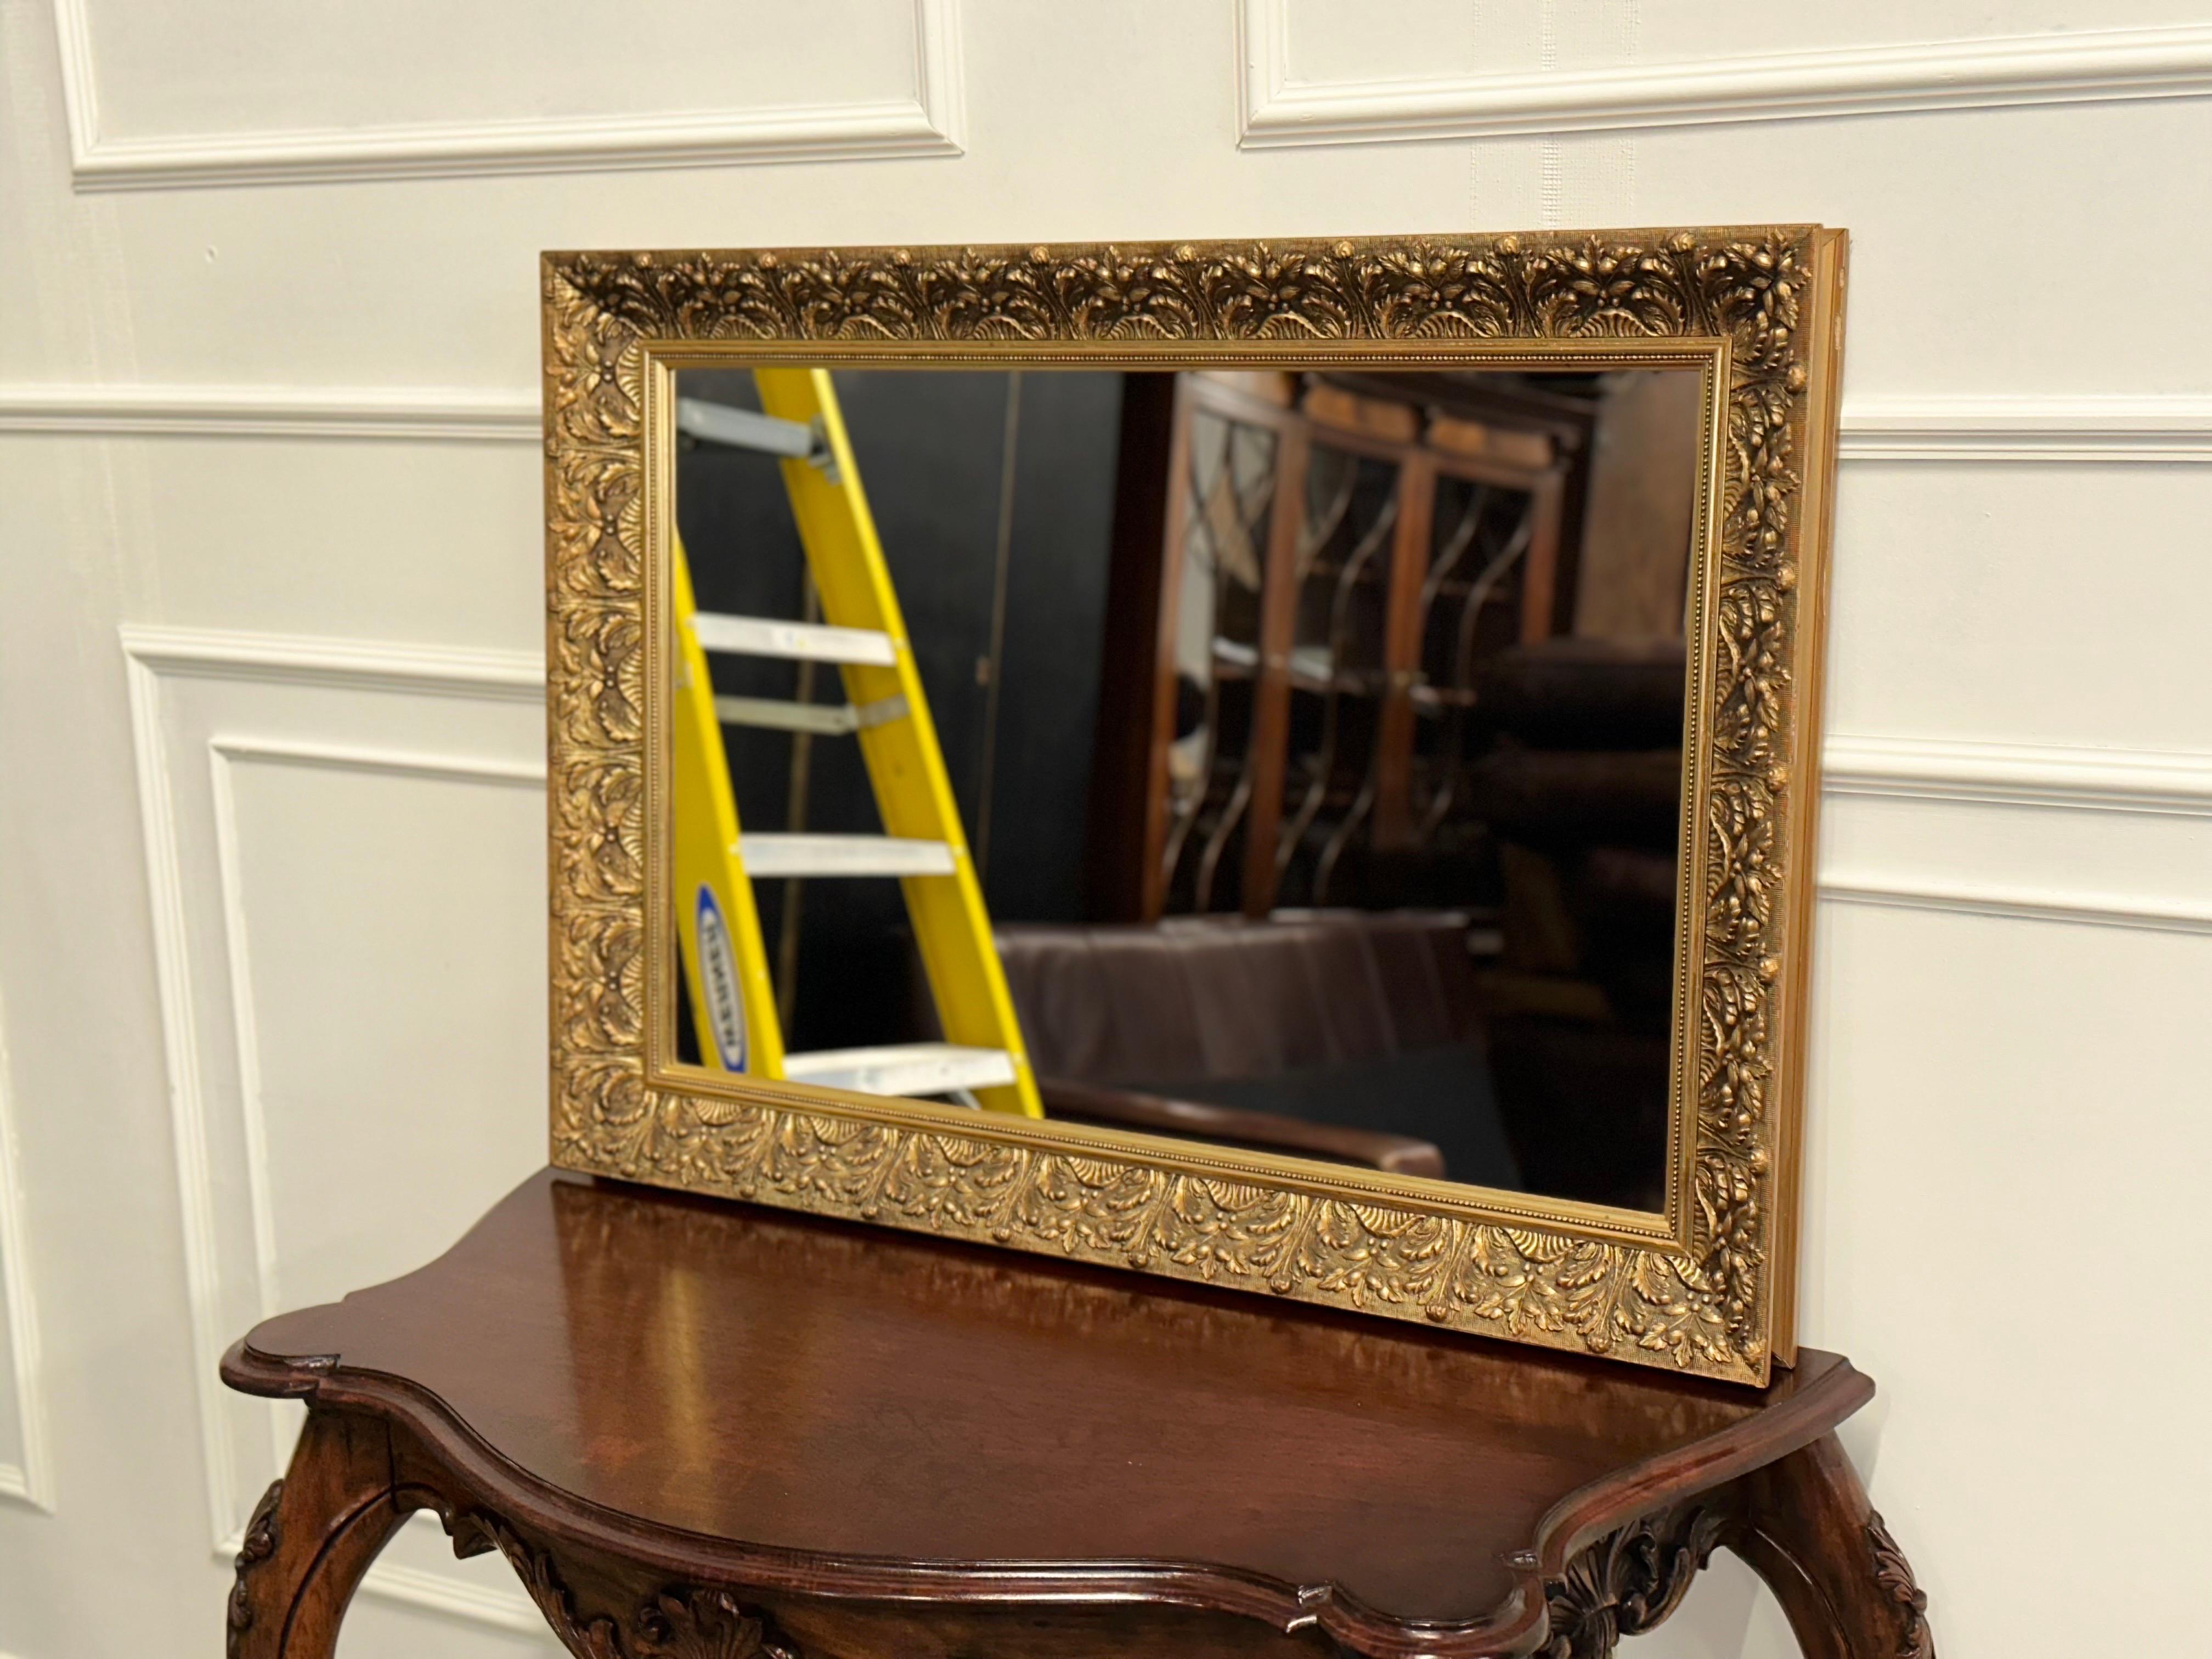 We are delighted to offer for sale this Lovely Carved Gold Ornate Bevelled Mirror.

Please carefully examine the pictures to see the condition before purchasing, as they form part of the description. If you have any questions, please message us.